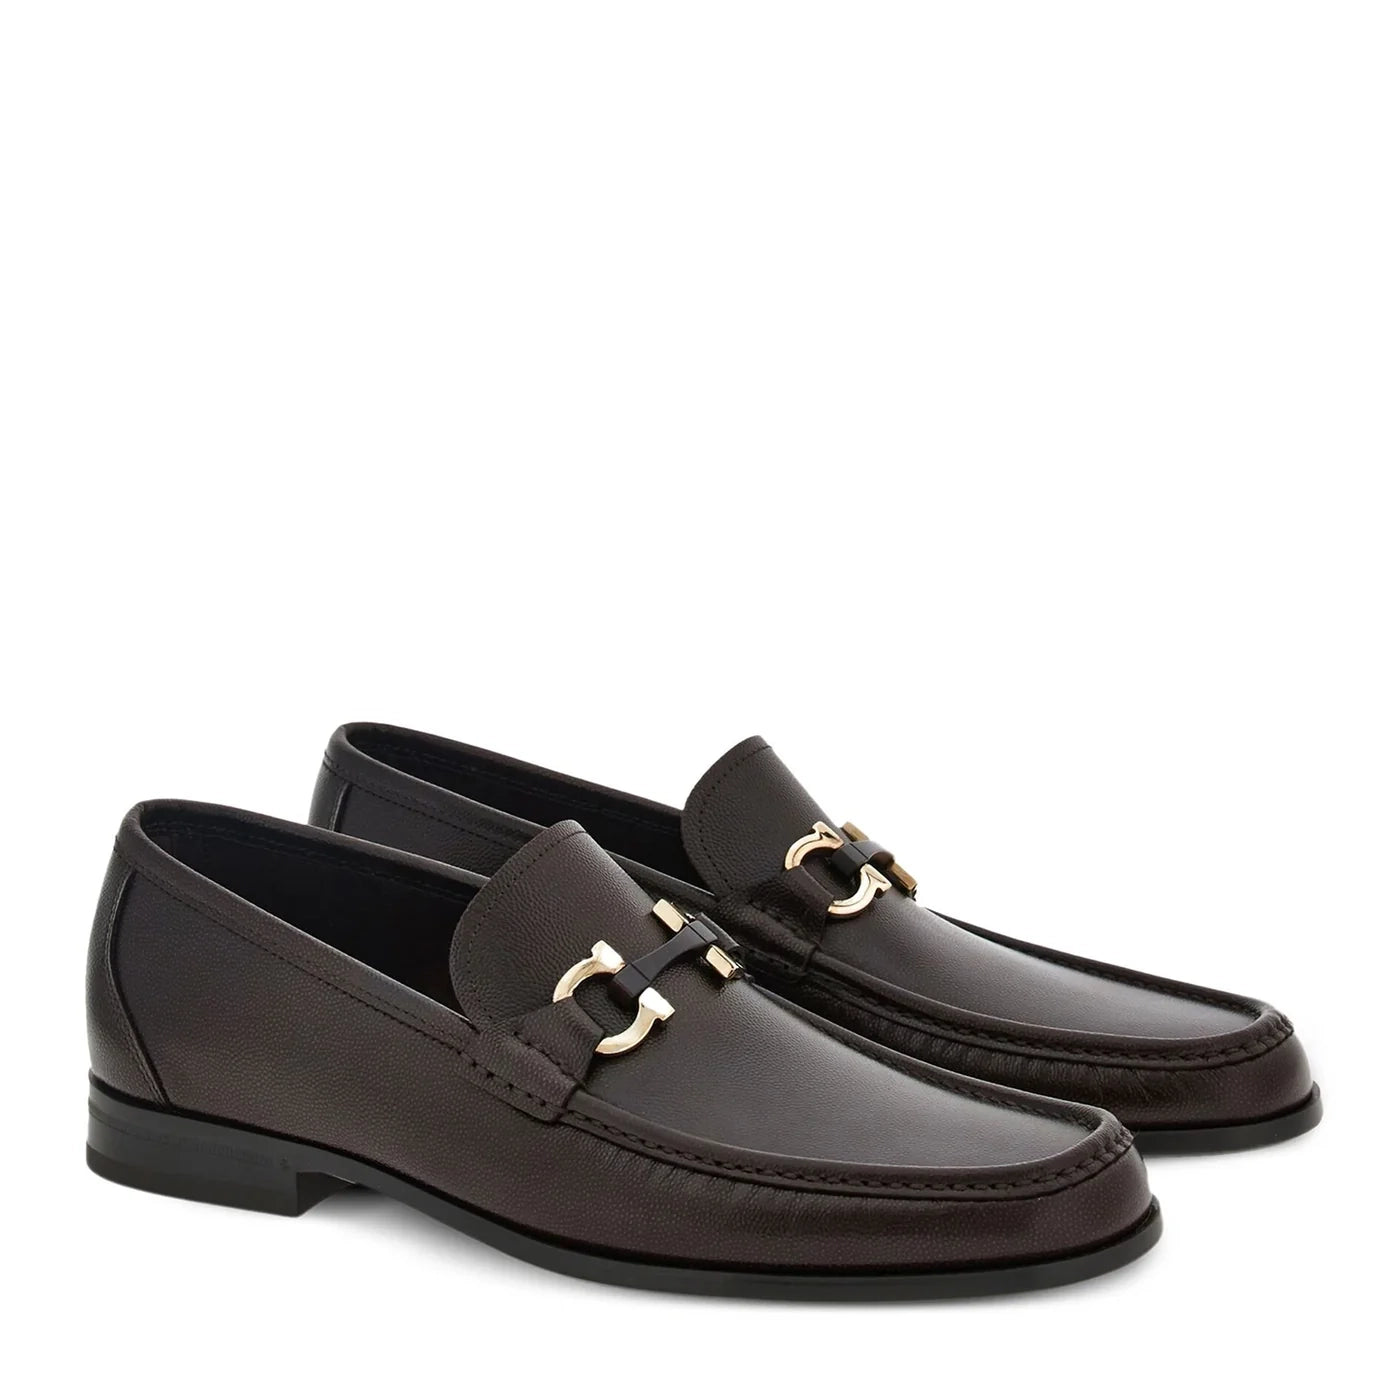 Leather Loafers for Men - Dark Brown